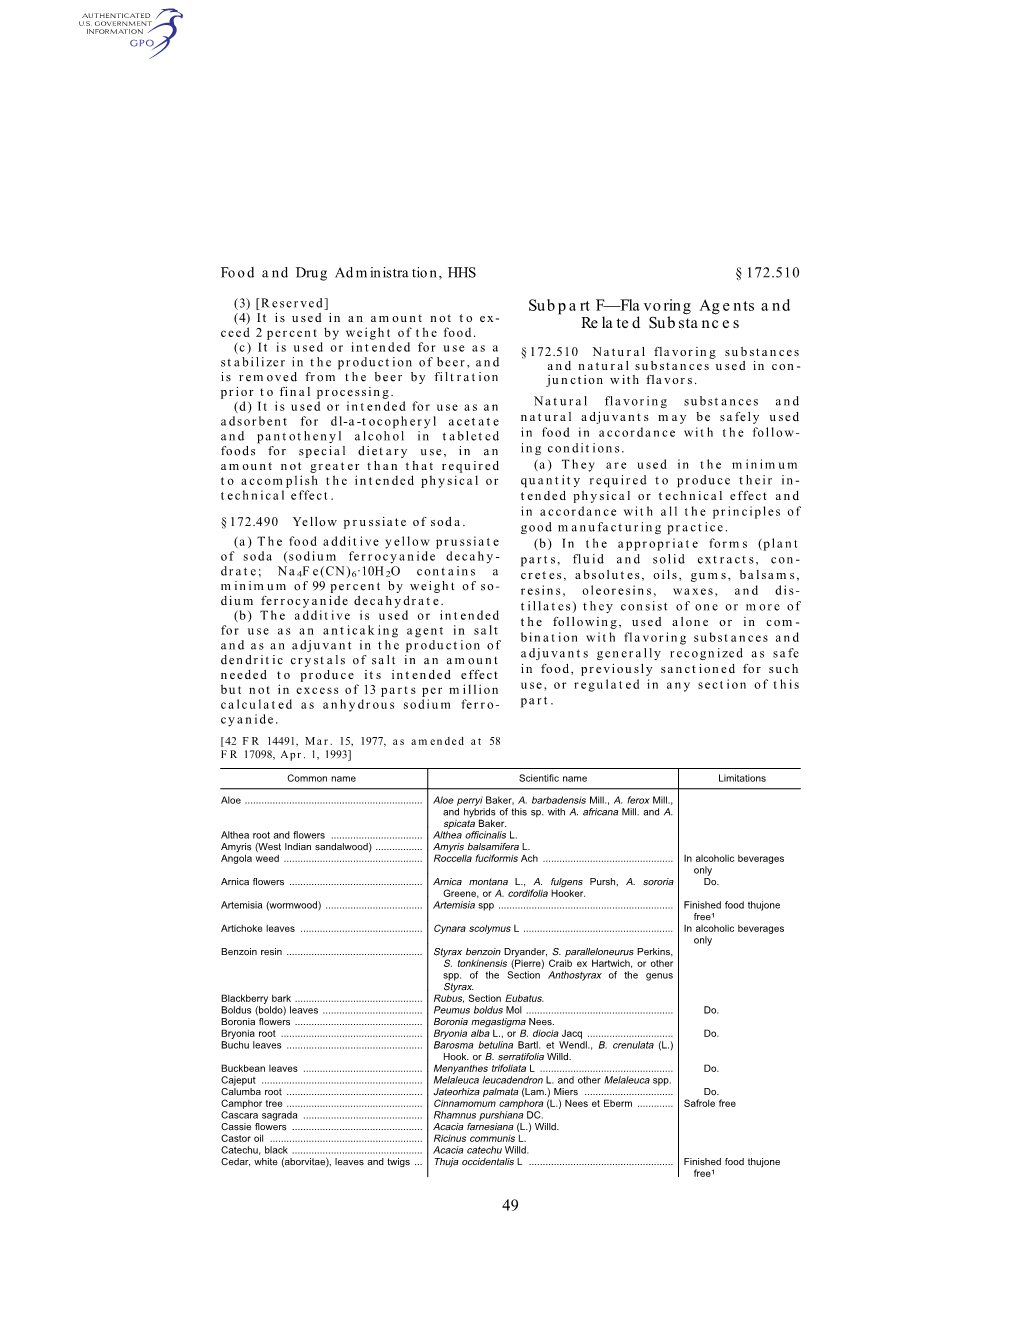 49 Subpart F—Flavoring Agents and Related Substances